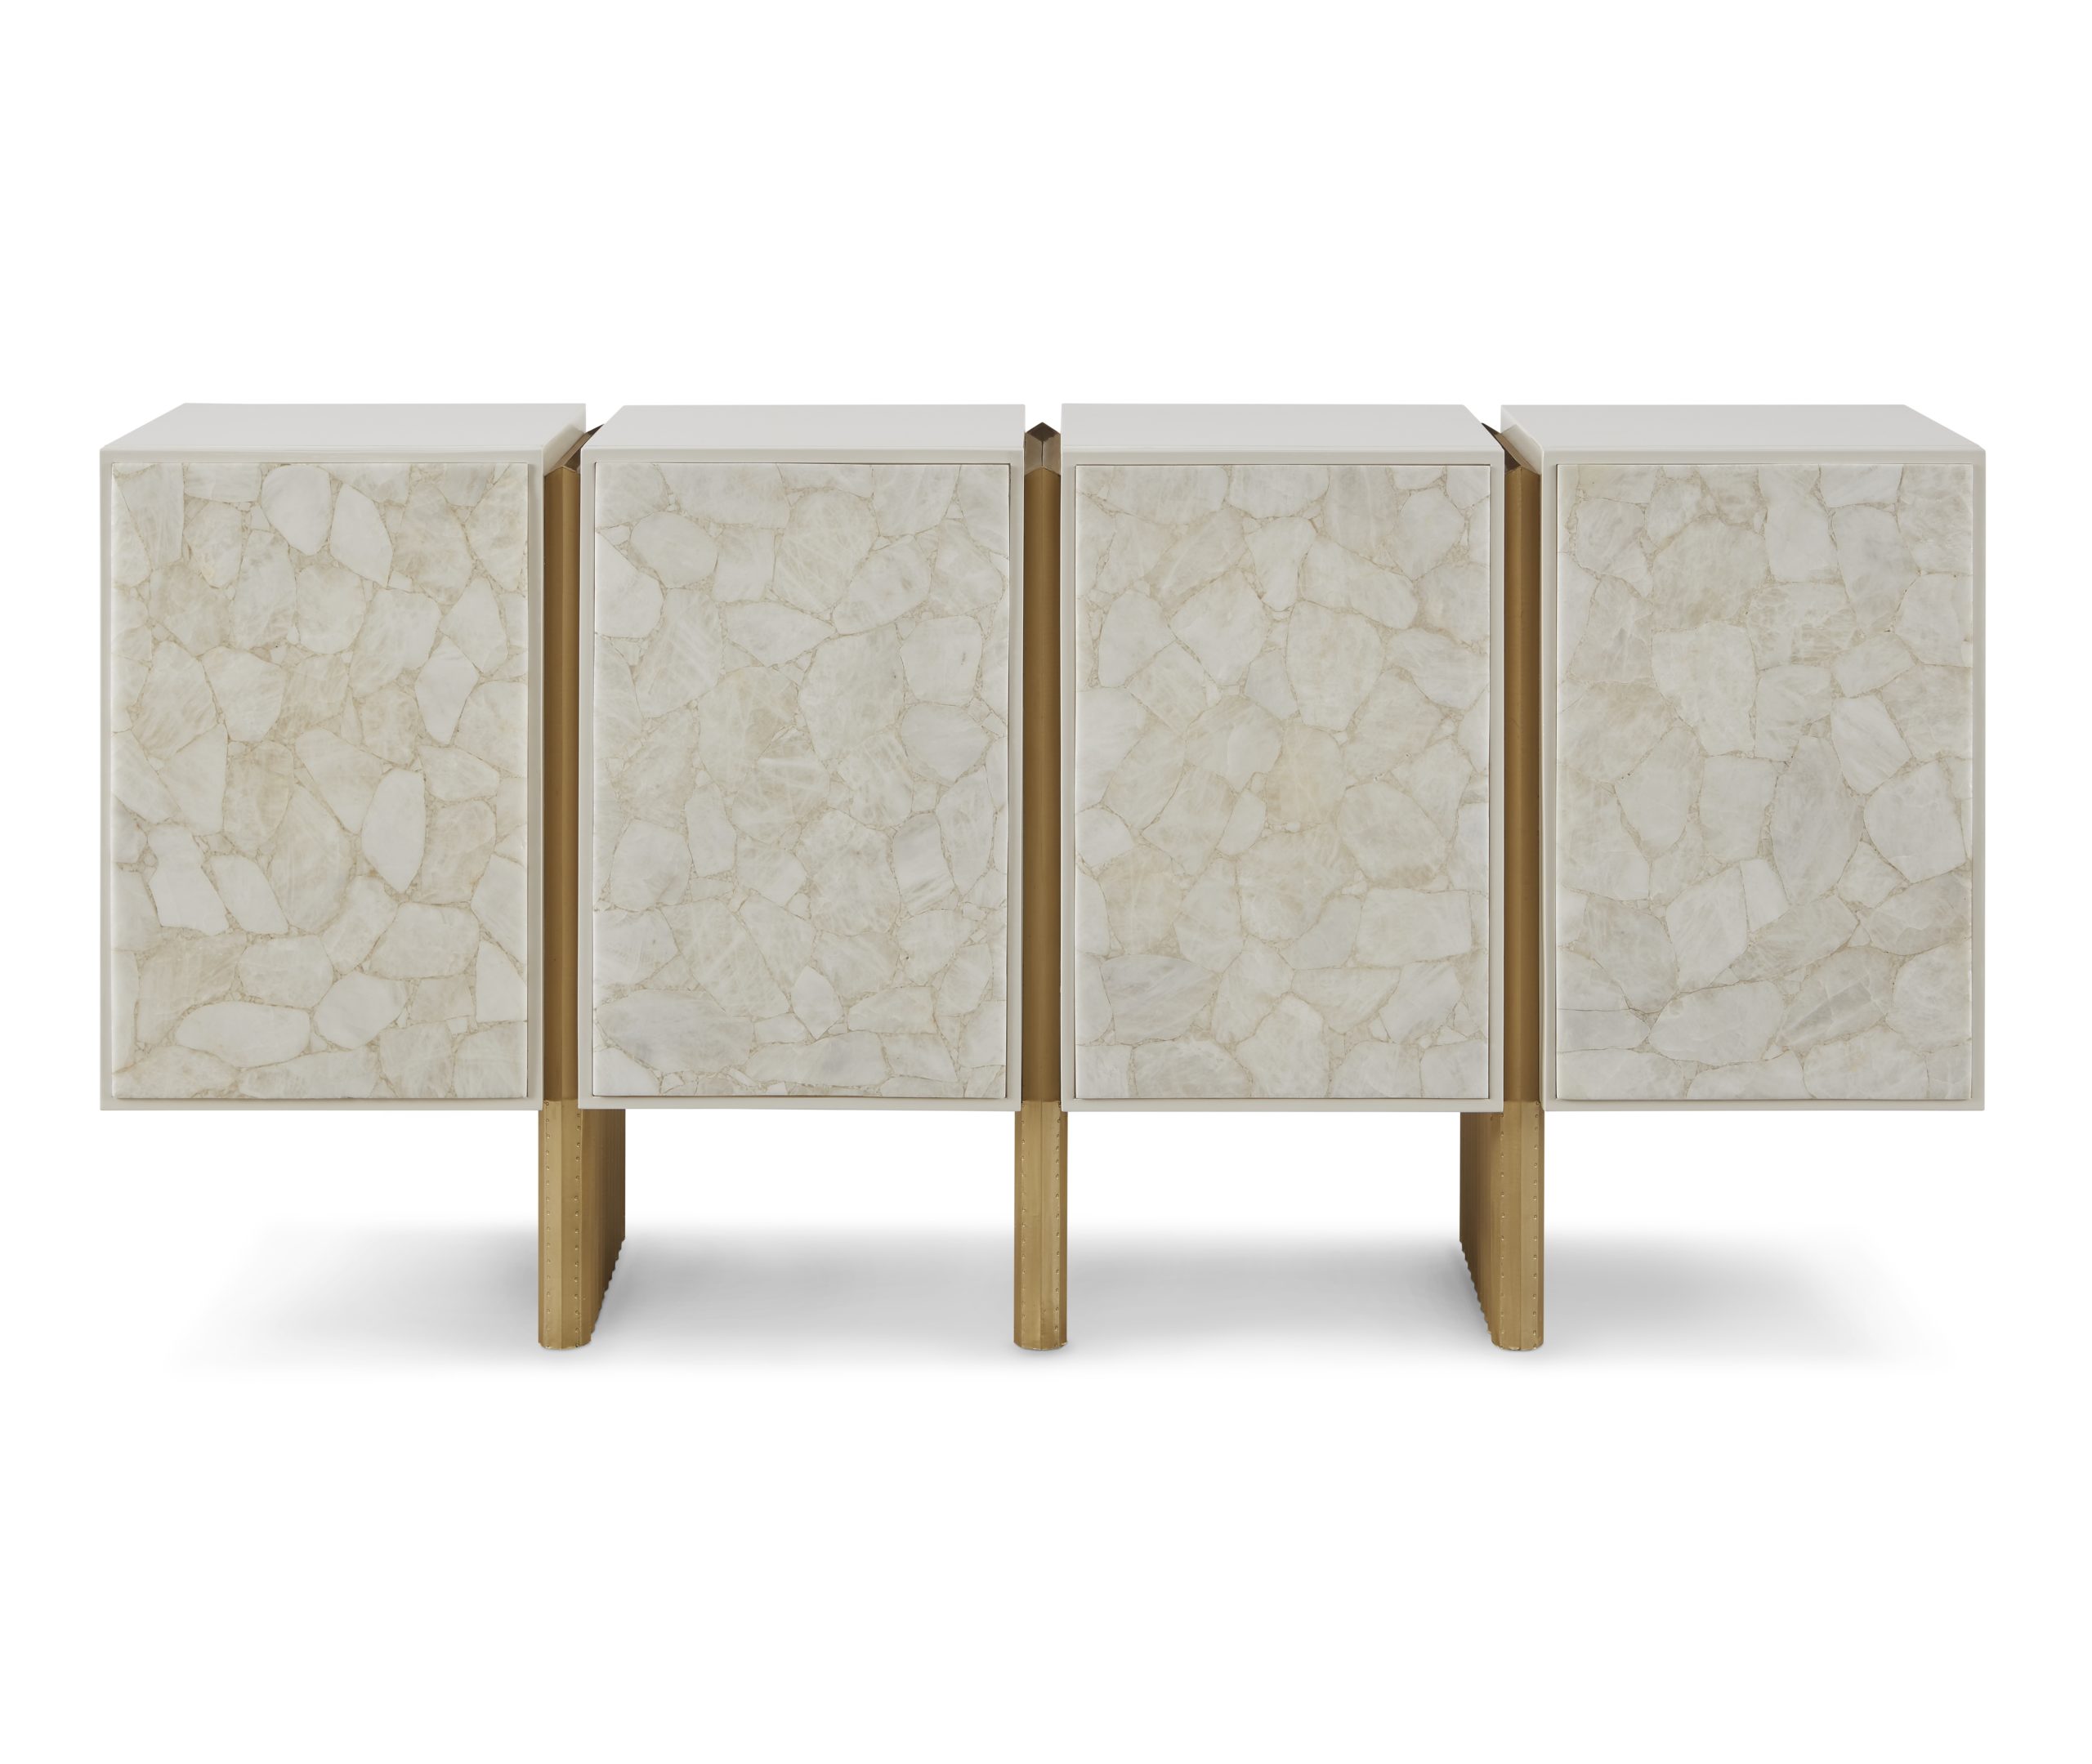 Baker_products_WNWN_kira_credenza_BAA3028_FRONT-scaled-1